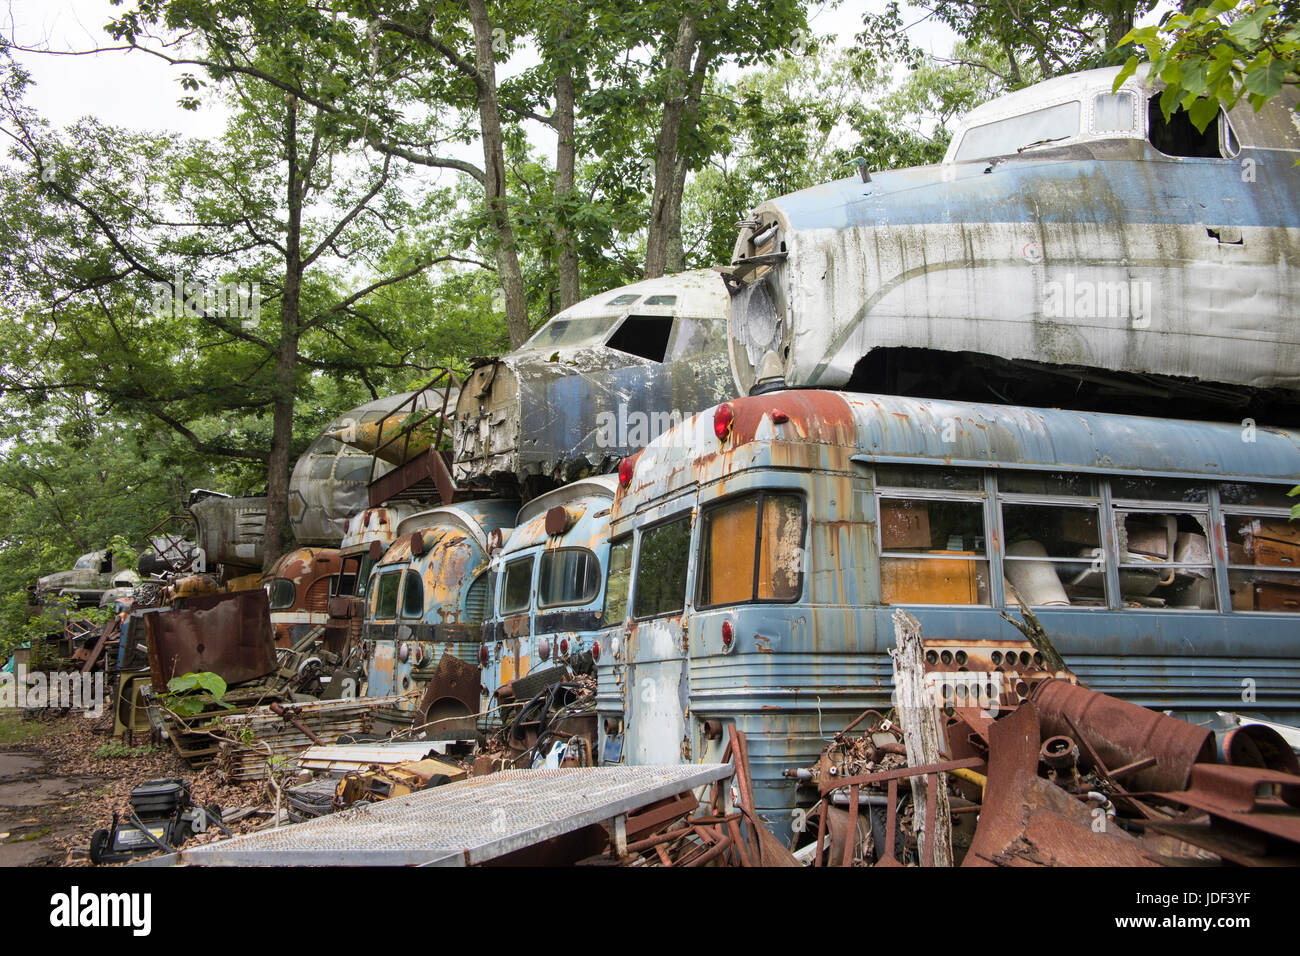 Cockpit units of wrecked military aircraft on top of transport busses in junkyard. Stock Photo